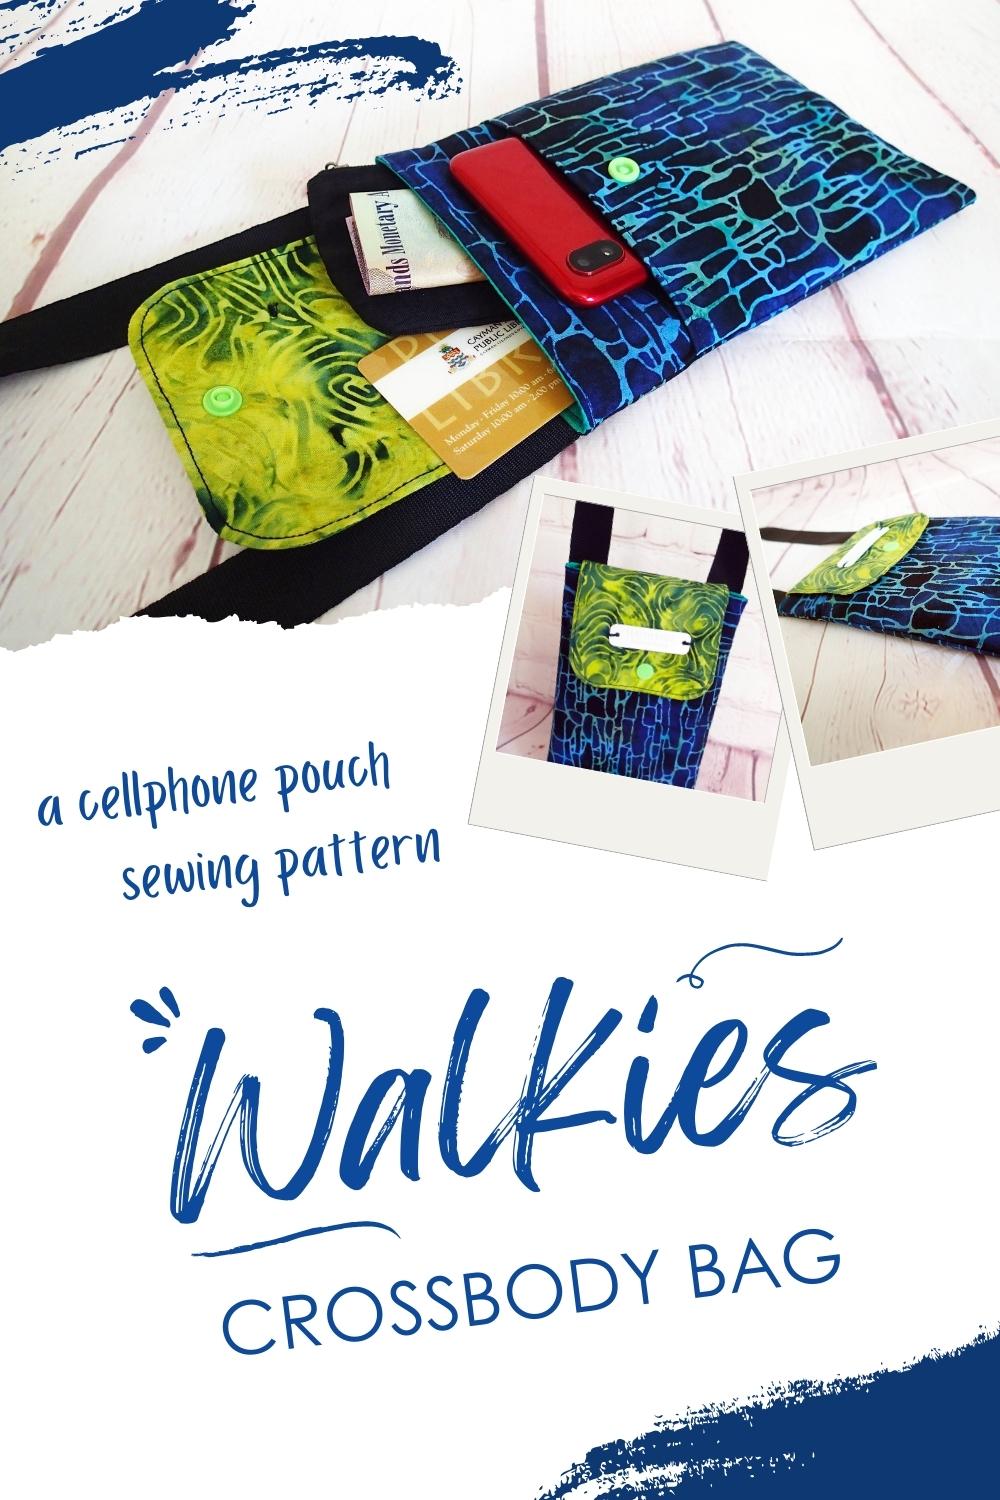 A very quick and easy bag to sew for beginners. The Walkies Doggie Crossbody Bag sews up as an easy cell phone pouch pattern with shoulder or crossbody strap. The perfect bag to sew for beginners, it is scrap friendly, doesn't use expensive materials, and is great as an easy project to sew and sell. Dog walking bag sewing pattern for doggy waste bags. SewSimpleBags